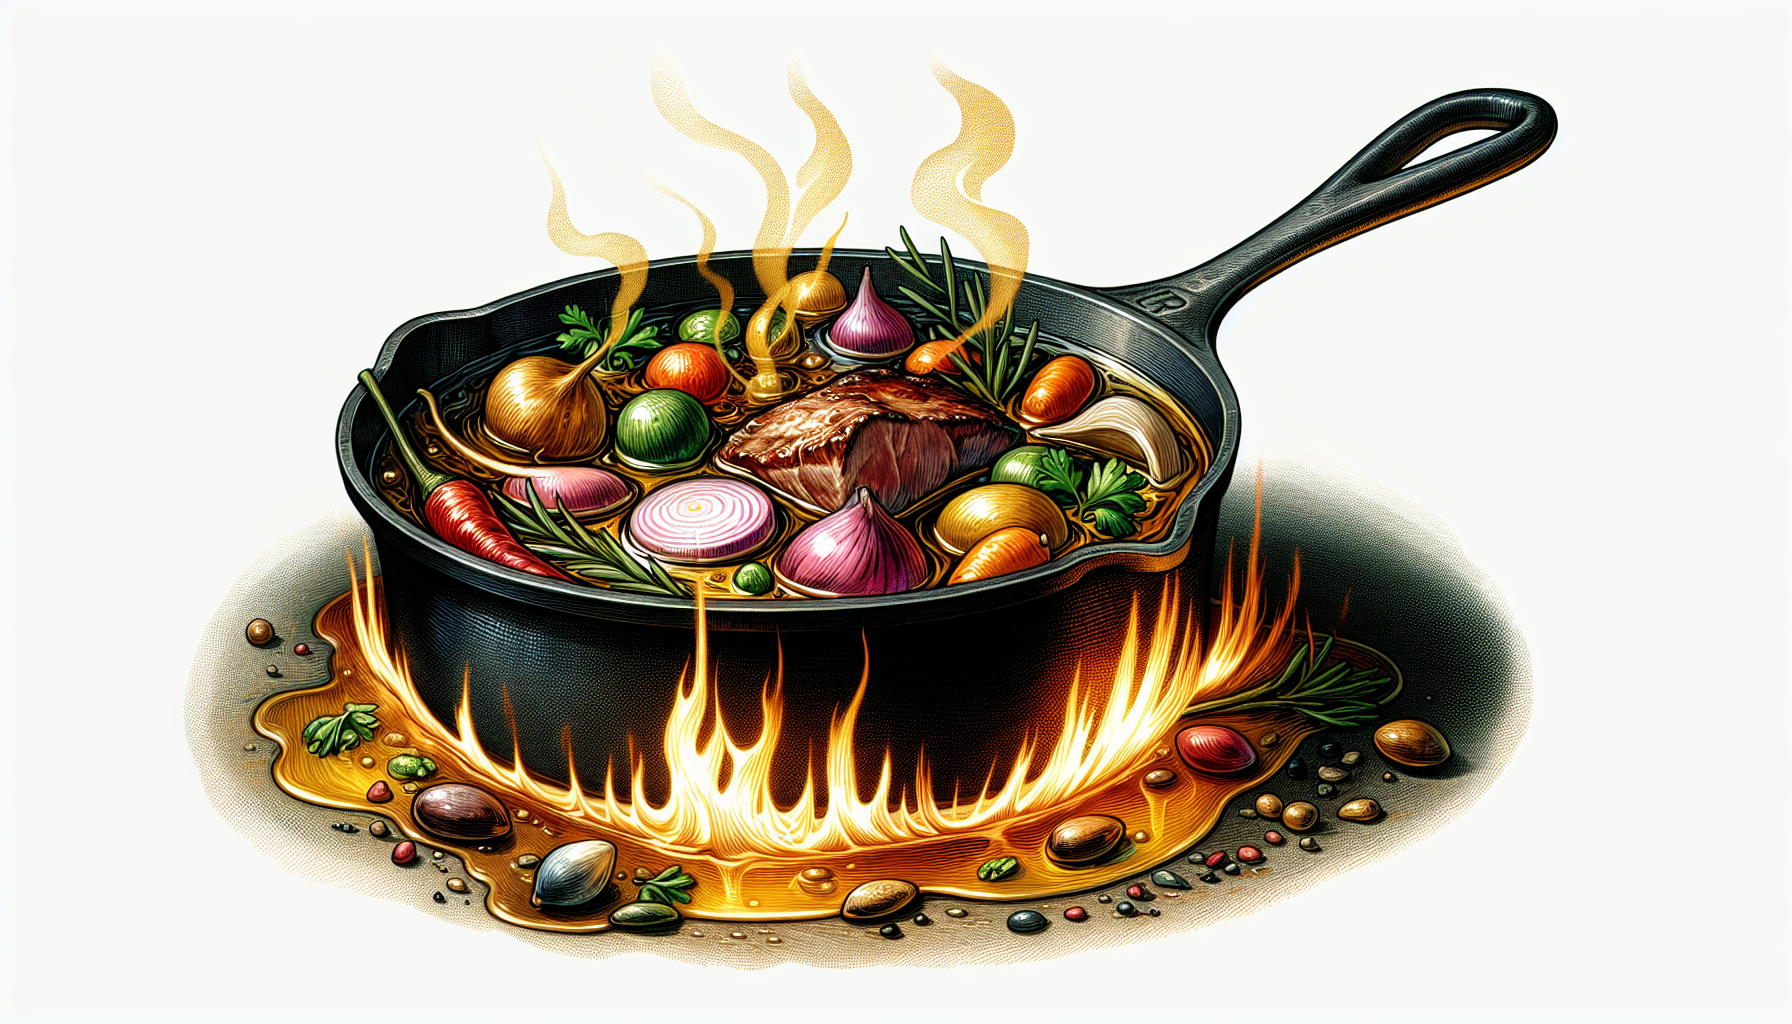 A pan sizzling with food being cooked in beef tallow